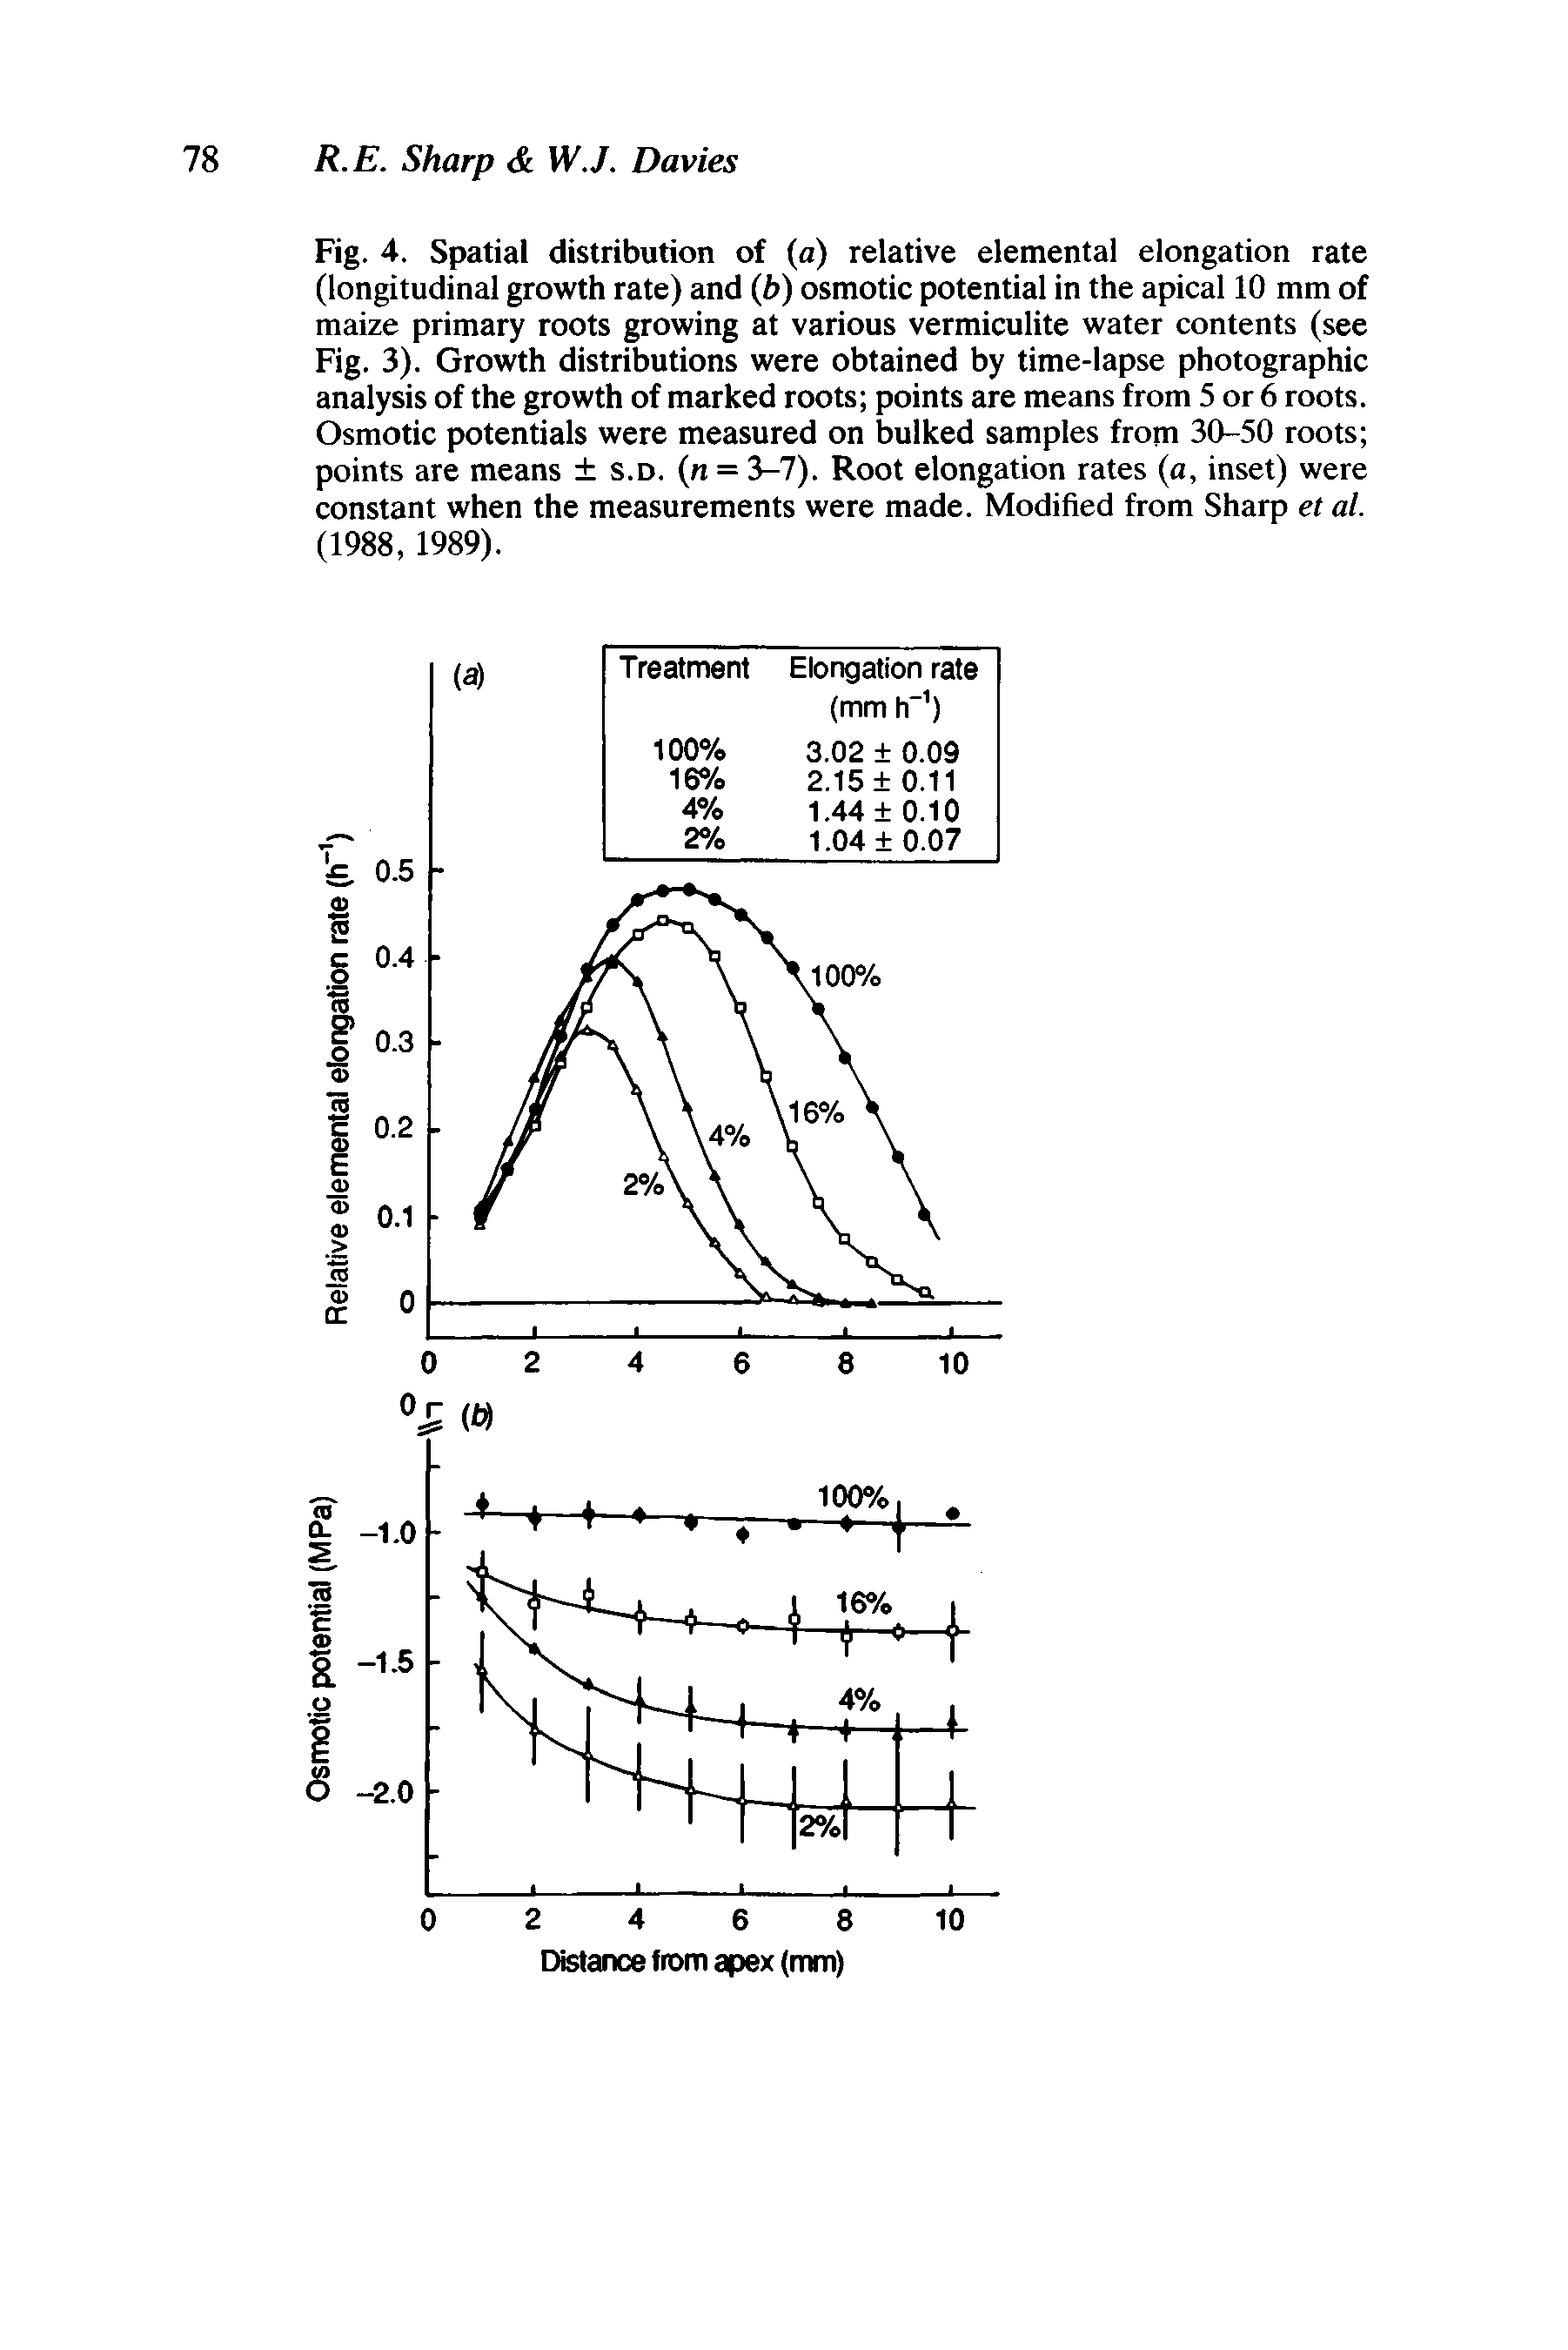 Fig. 4. Spatial distribution of (a) relative elemental elongation rate (longitudinal growth rate) and (p) osmotic potential in the apical 10 mm of maize primary roots growing at various vermiculite water contents (see Fig. 3). Growth distributions were obtained by time-lapse photographic analysis of the growth of marked roots points are means from 5 or 6 roots. Osmotic potentials were measured on bulked samples from 30-50 roots points are means s.d. (n = 3-7). Root elongation rates (a, inset) were constant when the measurements were made. Modified from Sharp et al. (1988, 1989).